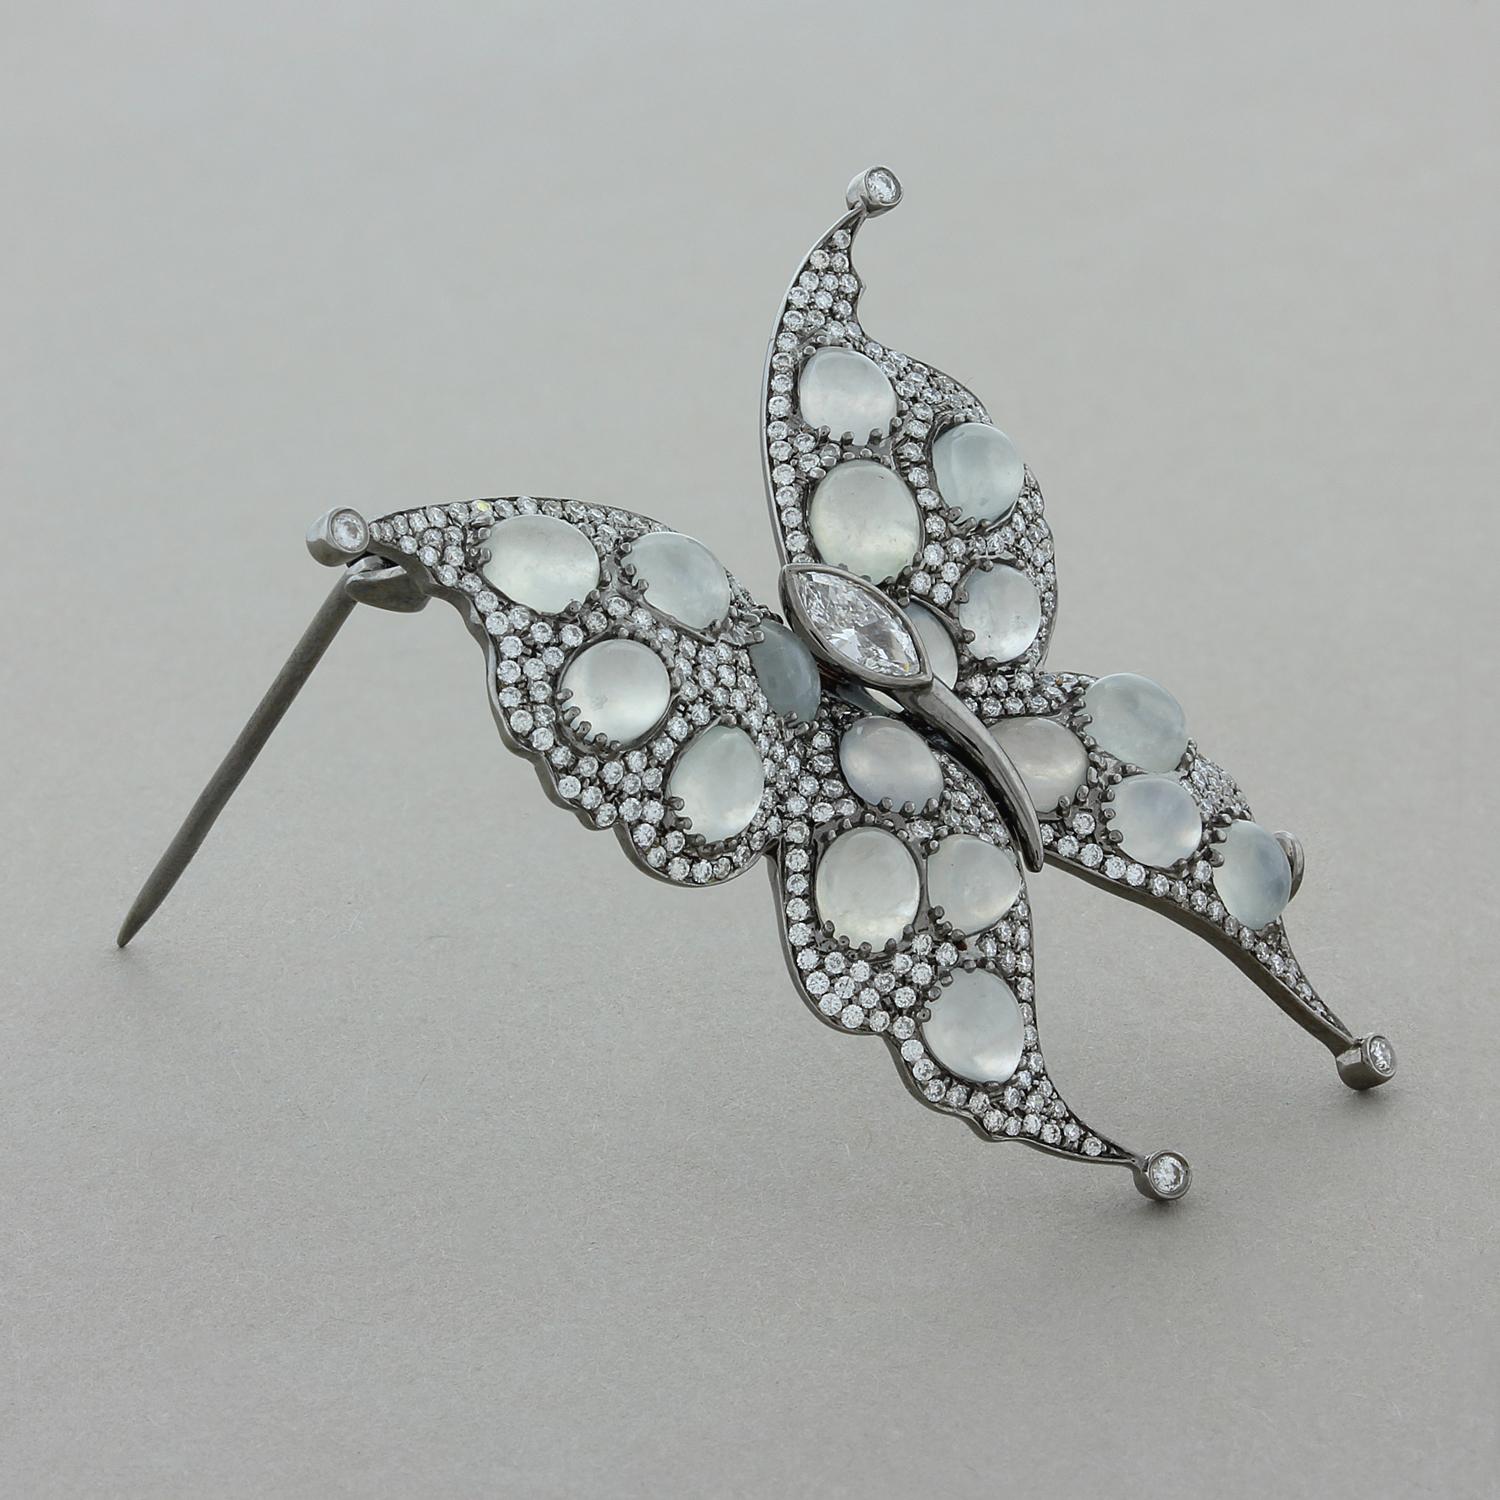 A spectacular butterfly brooch polka dotted with 8.90 carats of moonstone which show flashes of blue as they move in the light. The cabochon moonstones are accented by round cut diamonds and a single marquise cut diamond, totaling 1.38 carats. Set